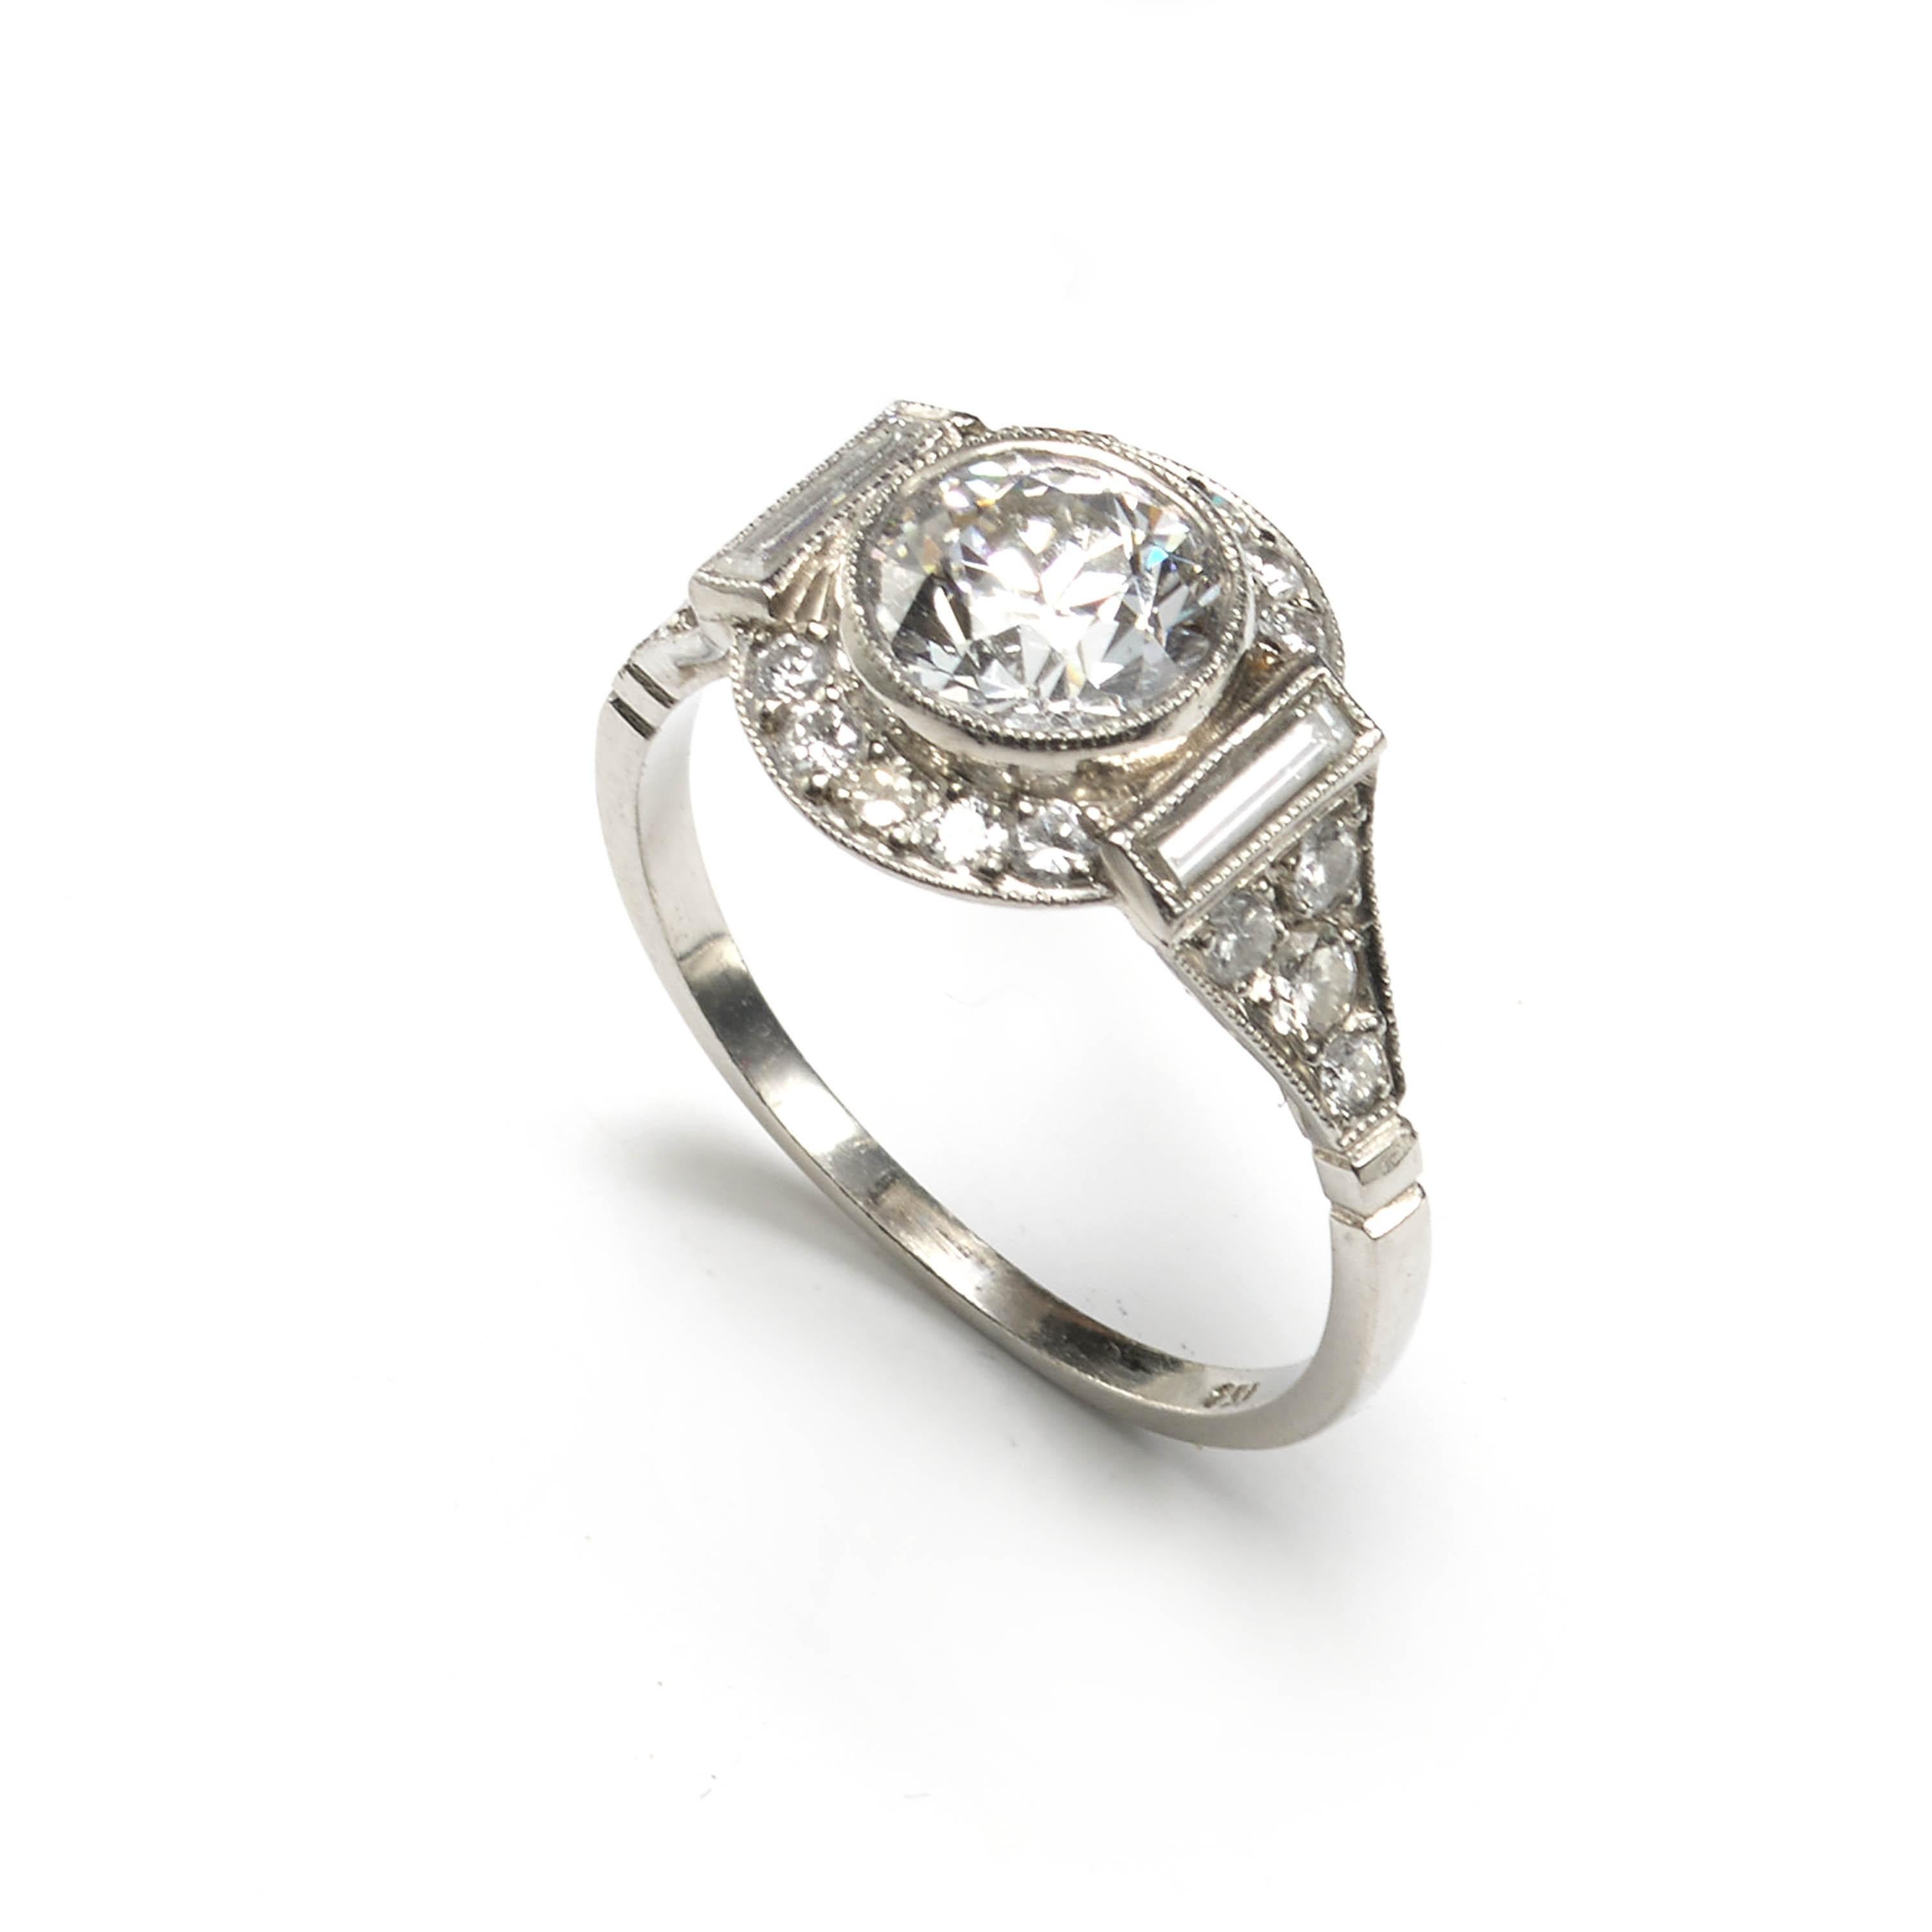 A modern, Art Deco style diamond cluster ring, set with a central round transitional brilliant cut diamond, weighing an estimated 1.48 carats, of estimated H colour and estimated VS1 clarity, surrounded by a halo of round brilliant cut diamonds,